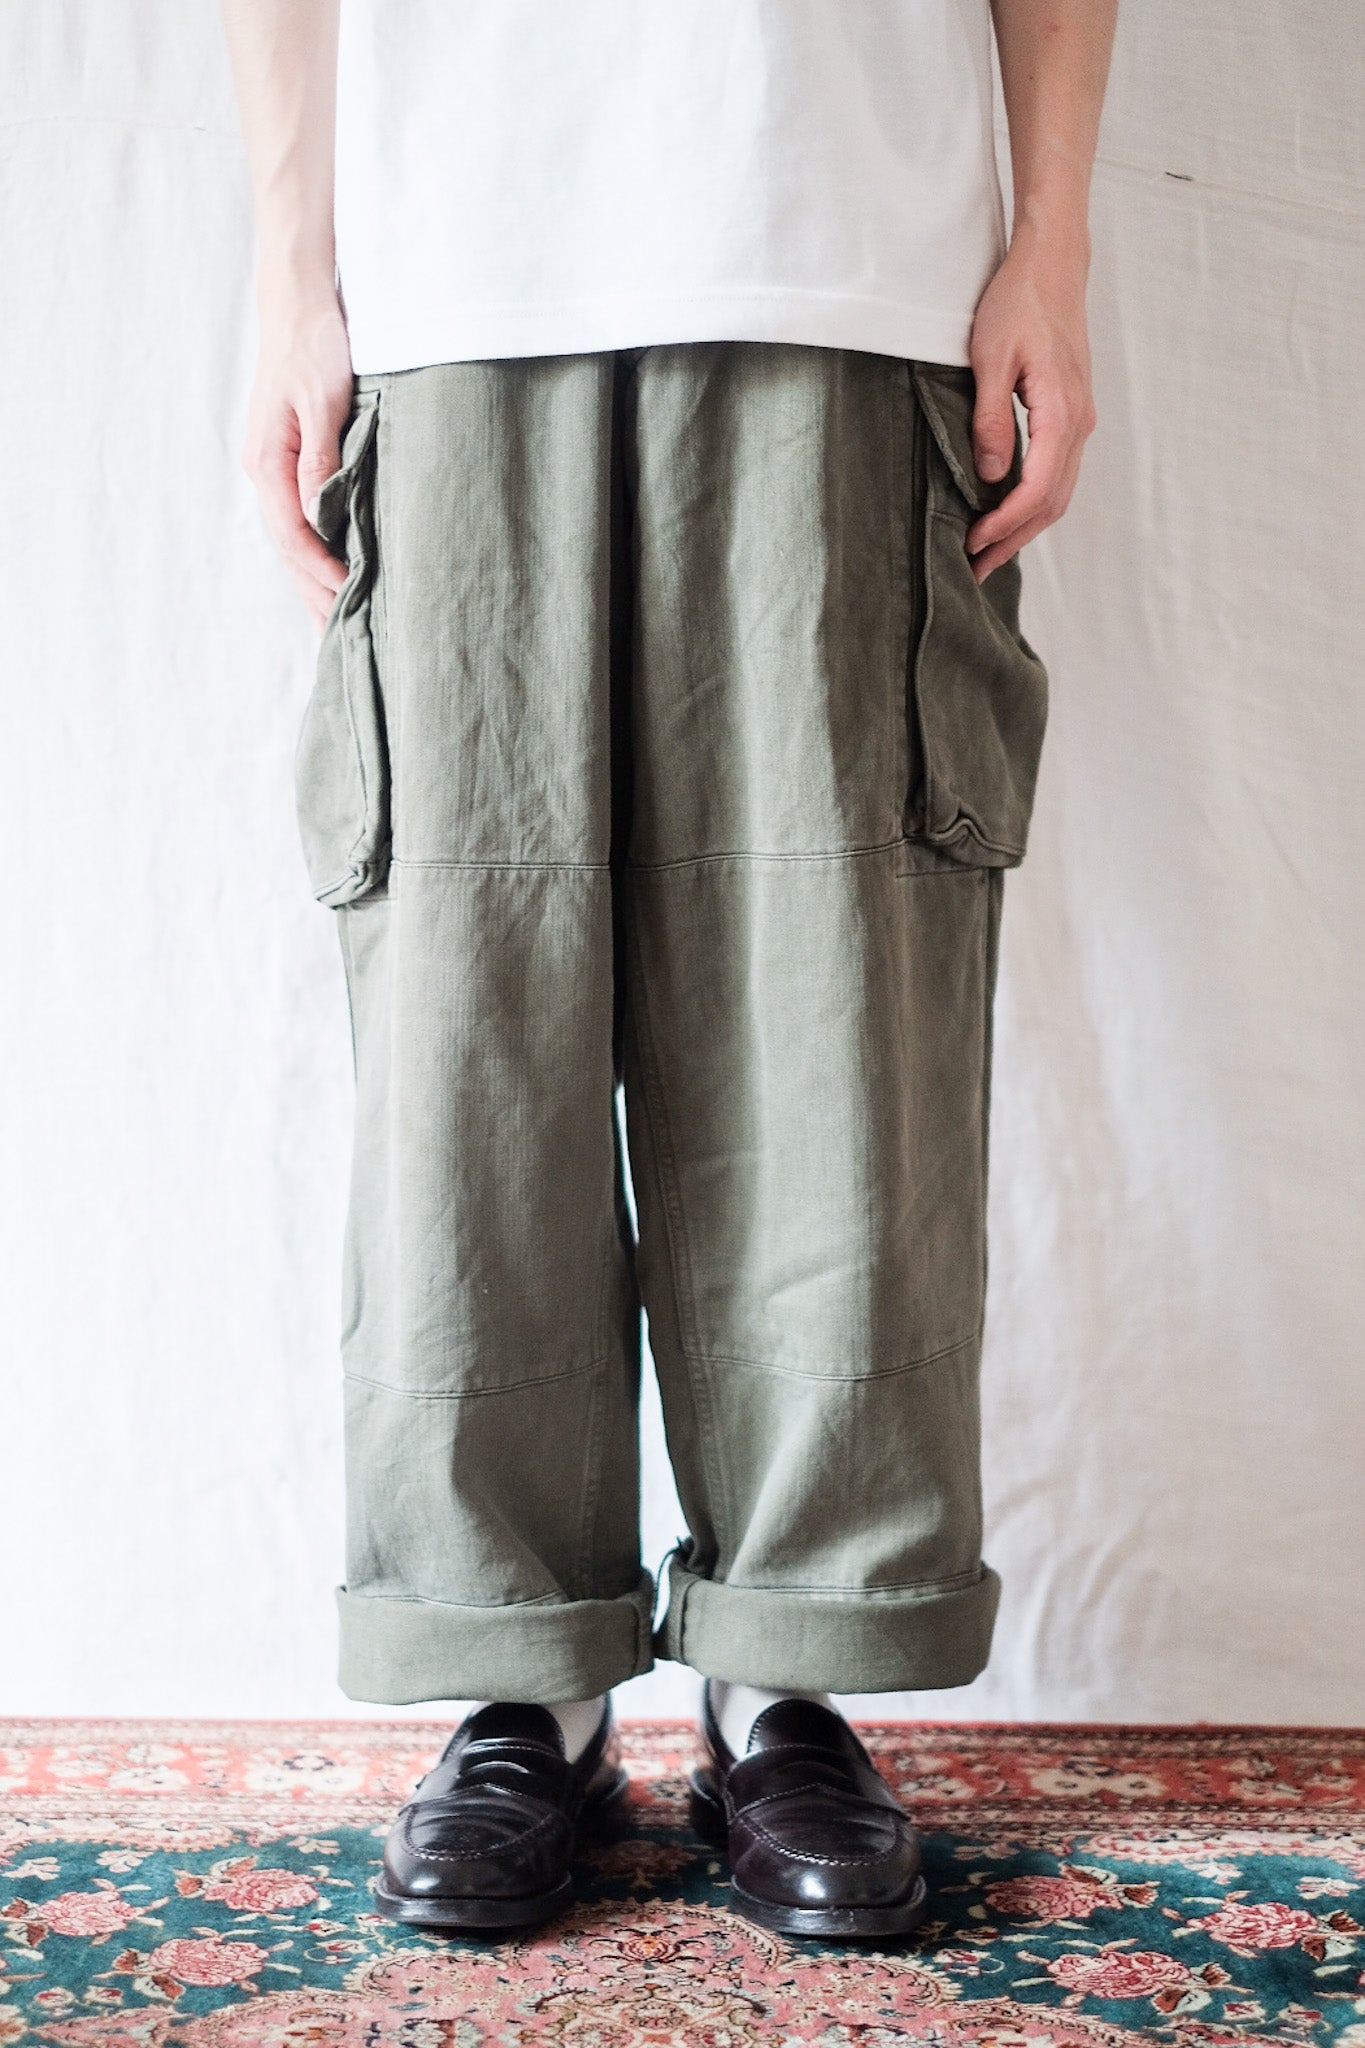 [~ 50's] German Army HBT Field Trousers